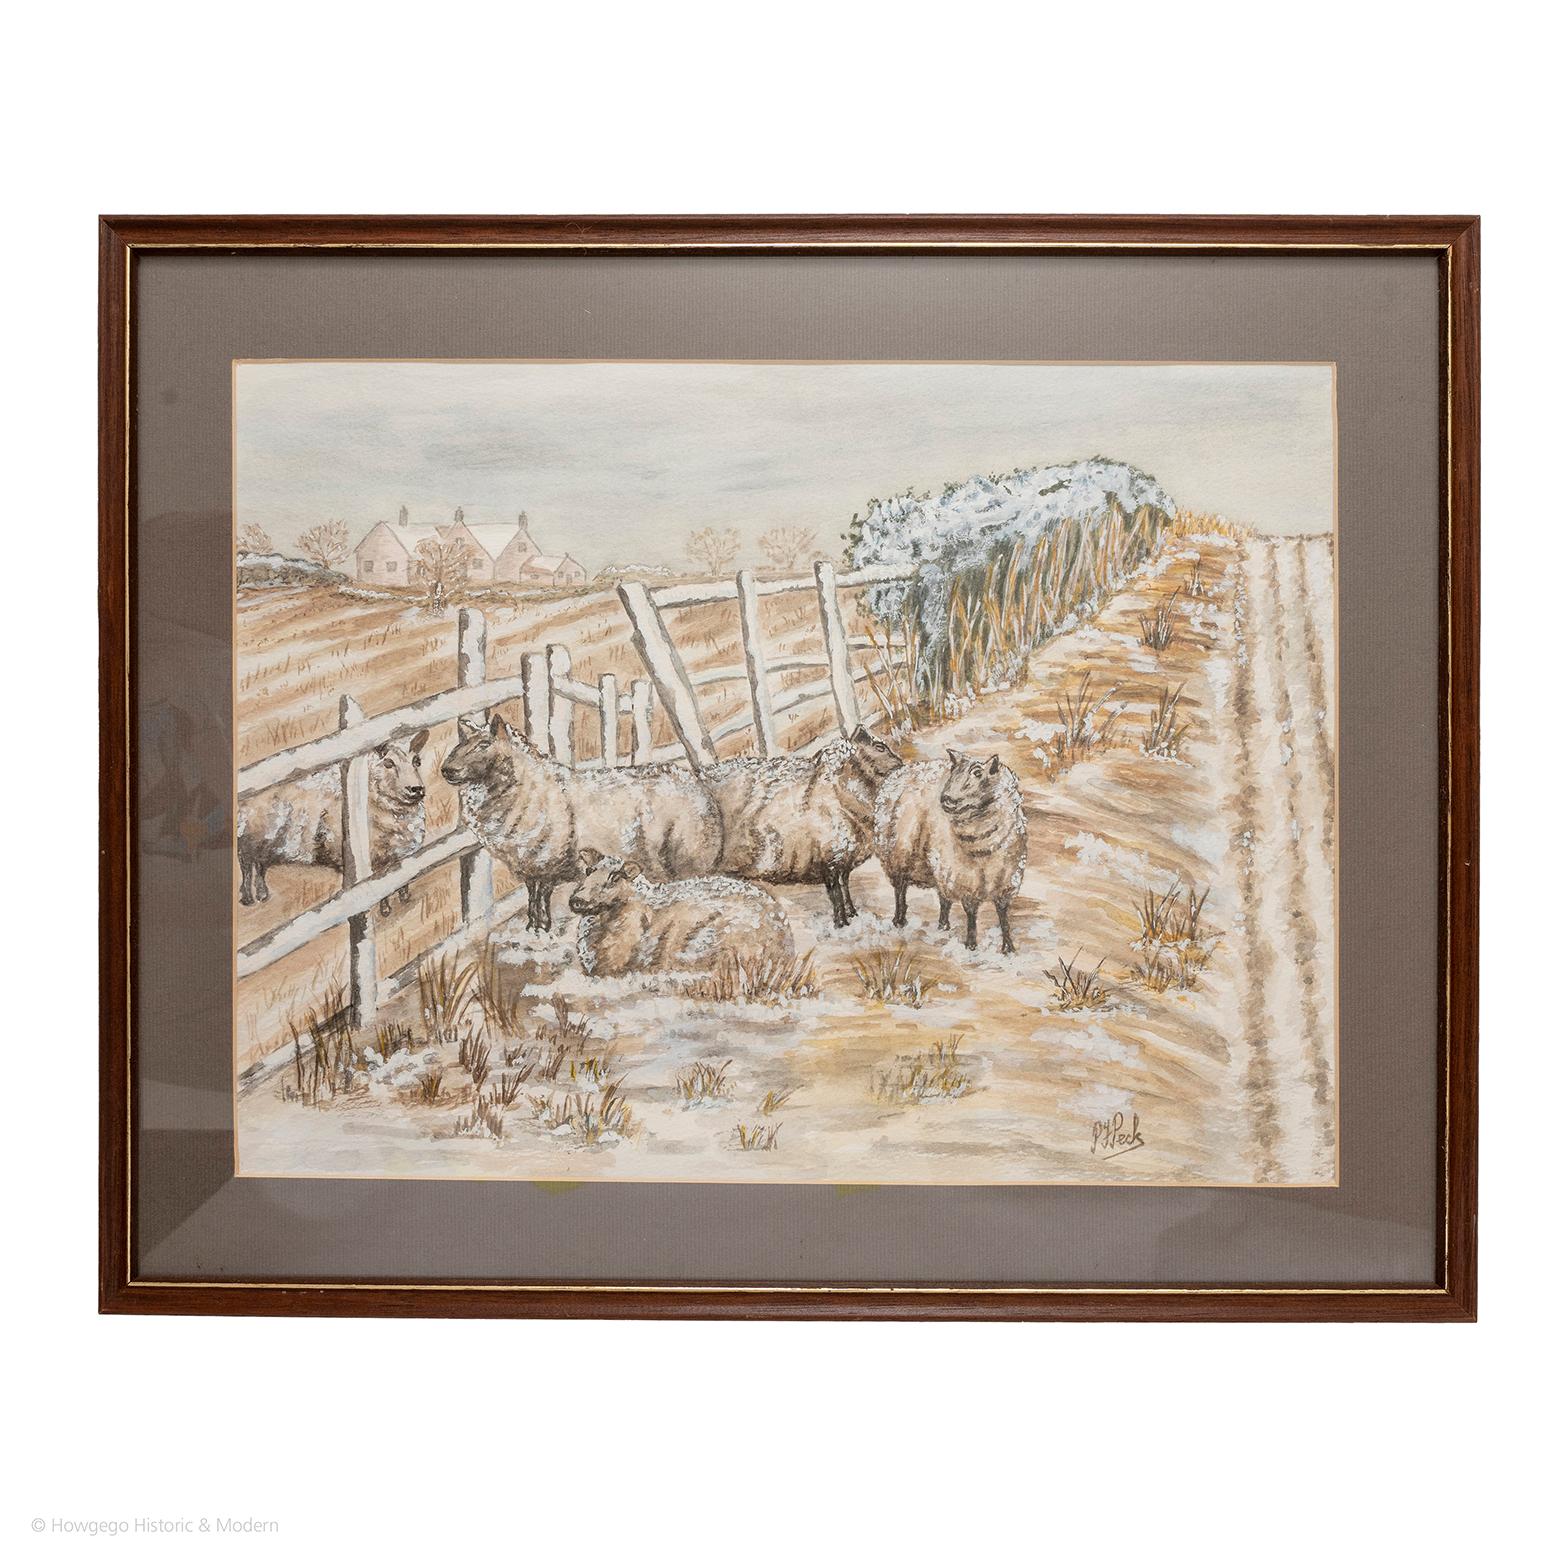 P J Peck: Winters Day
Five sheep in a snowy rural landscape
Watercolour and gouache on paper

Visible sheet length 38cm, 15